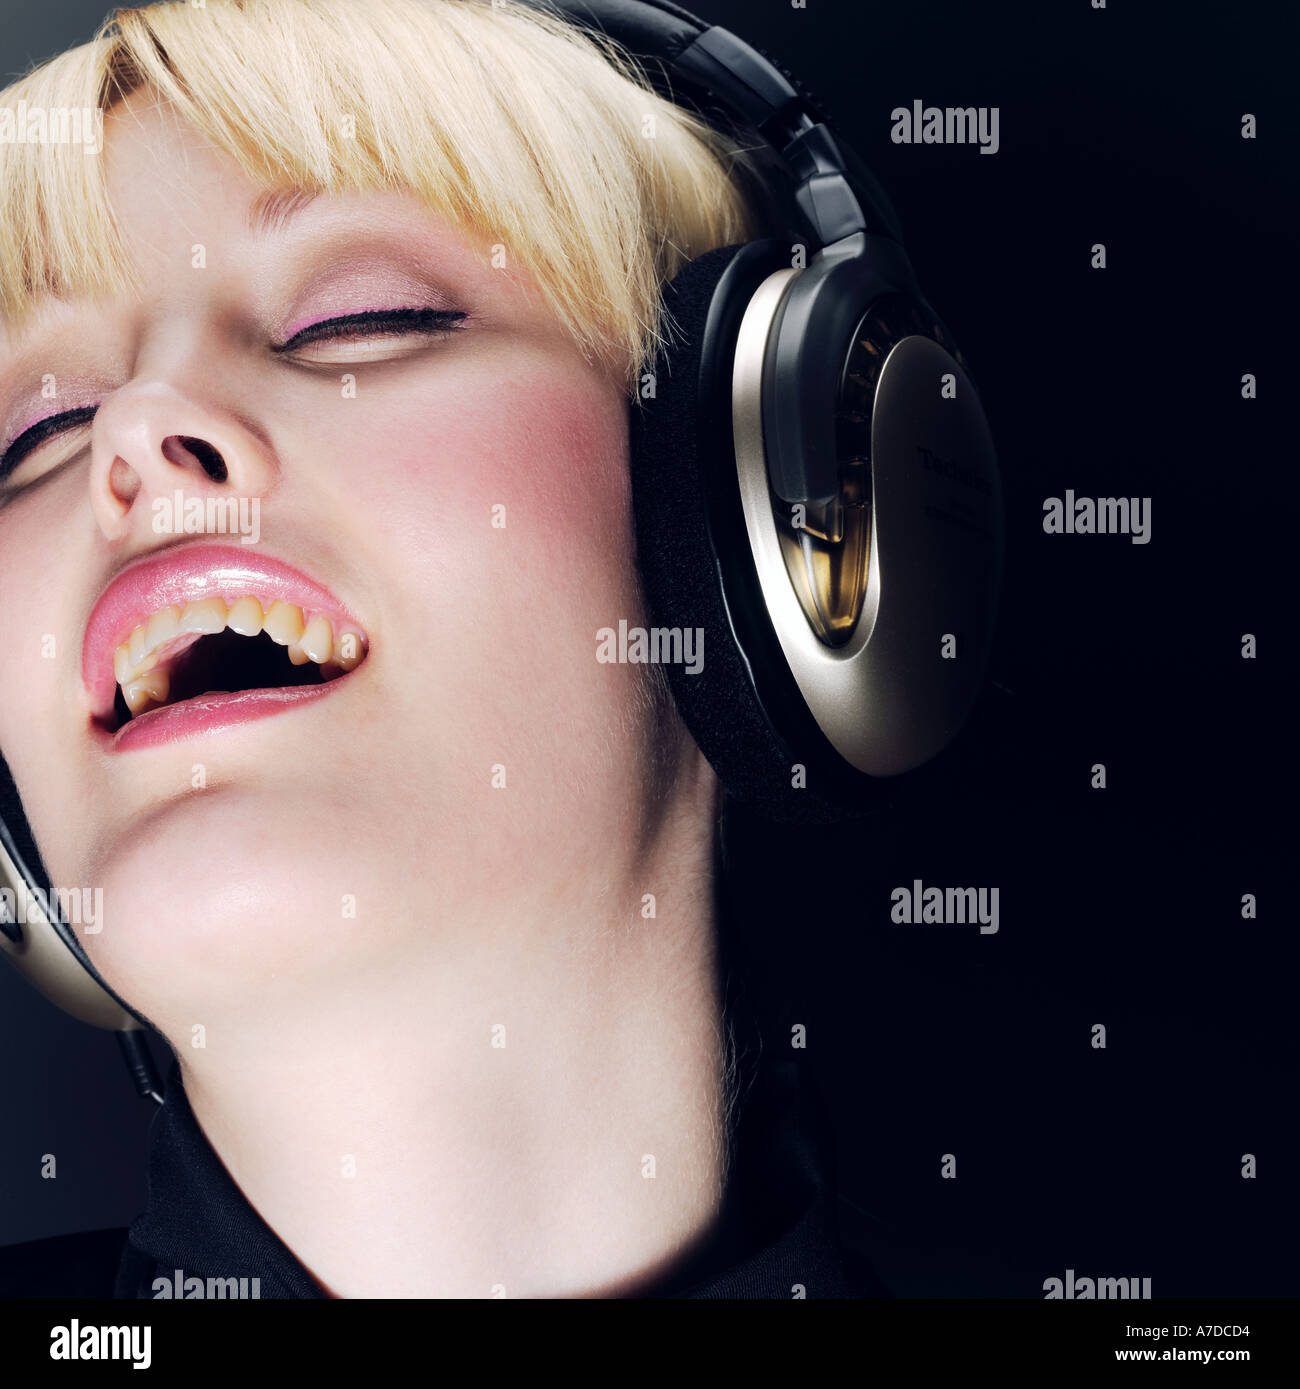 BLONDE EYES CLOSED WITH HEADPHONES Stock Photo